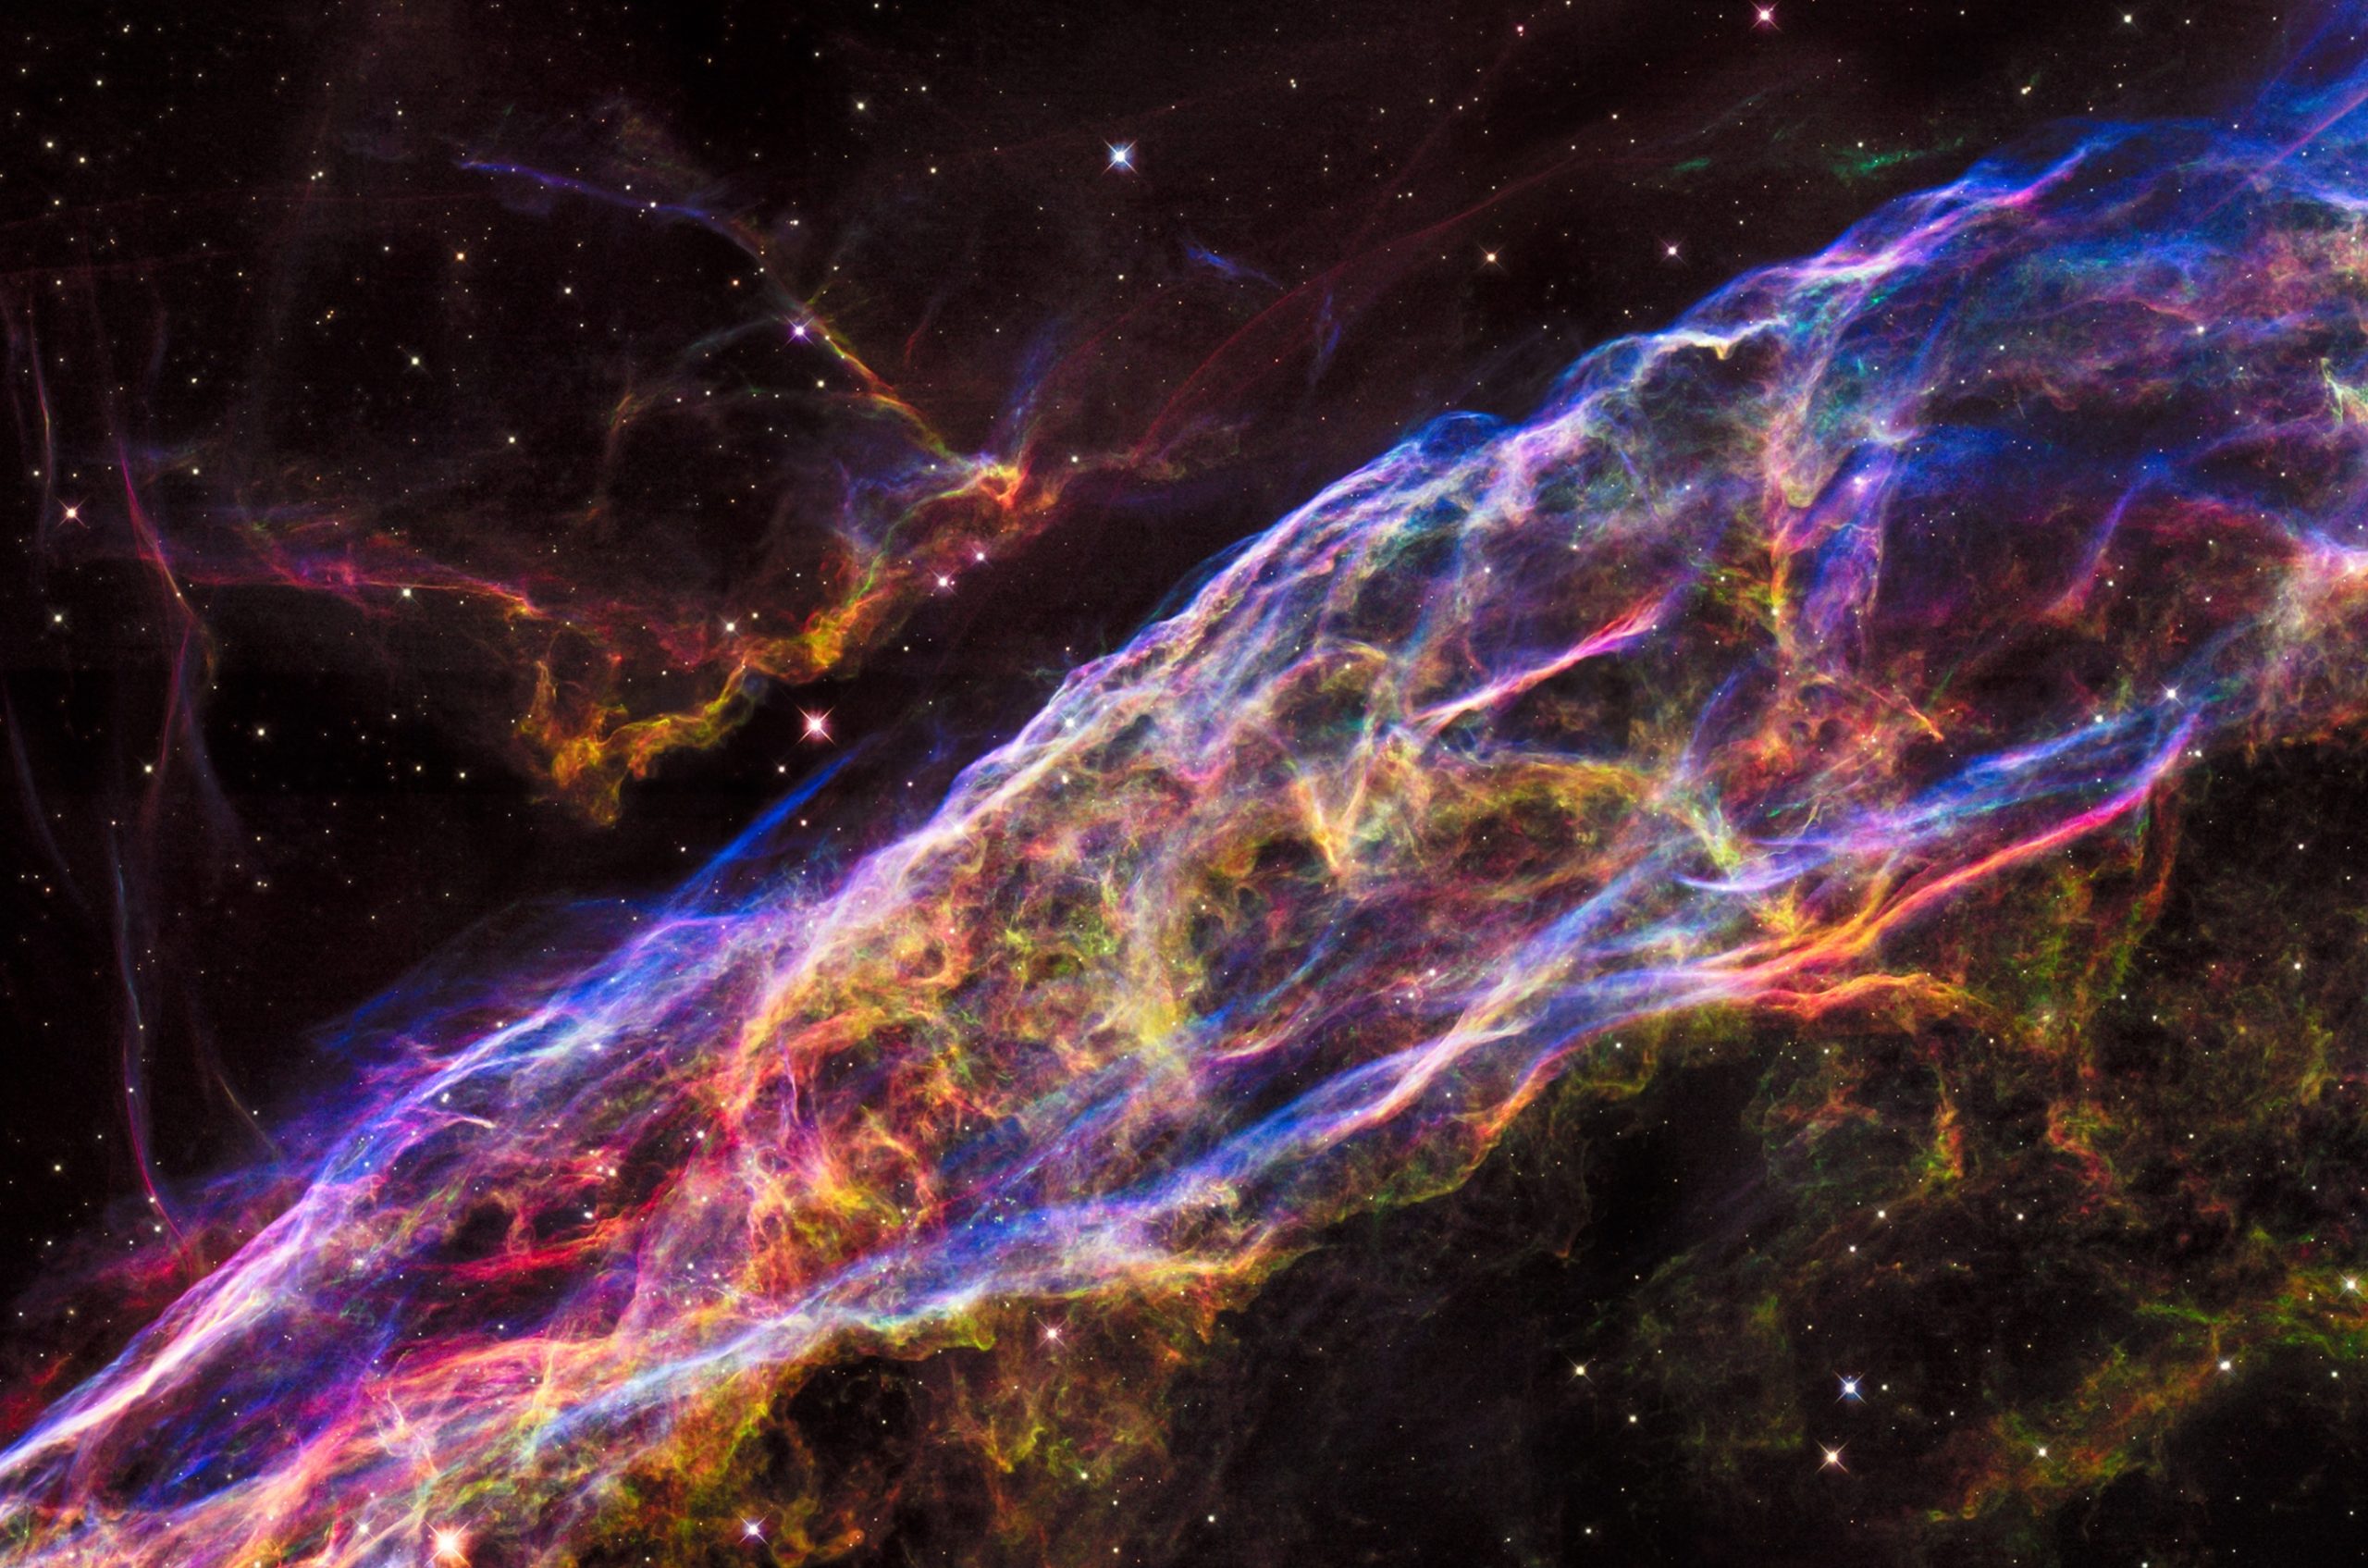 Veil Nebula supernova remnant picture by the Hubble Space Telescope